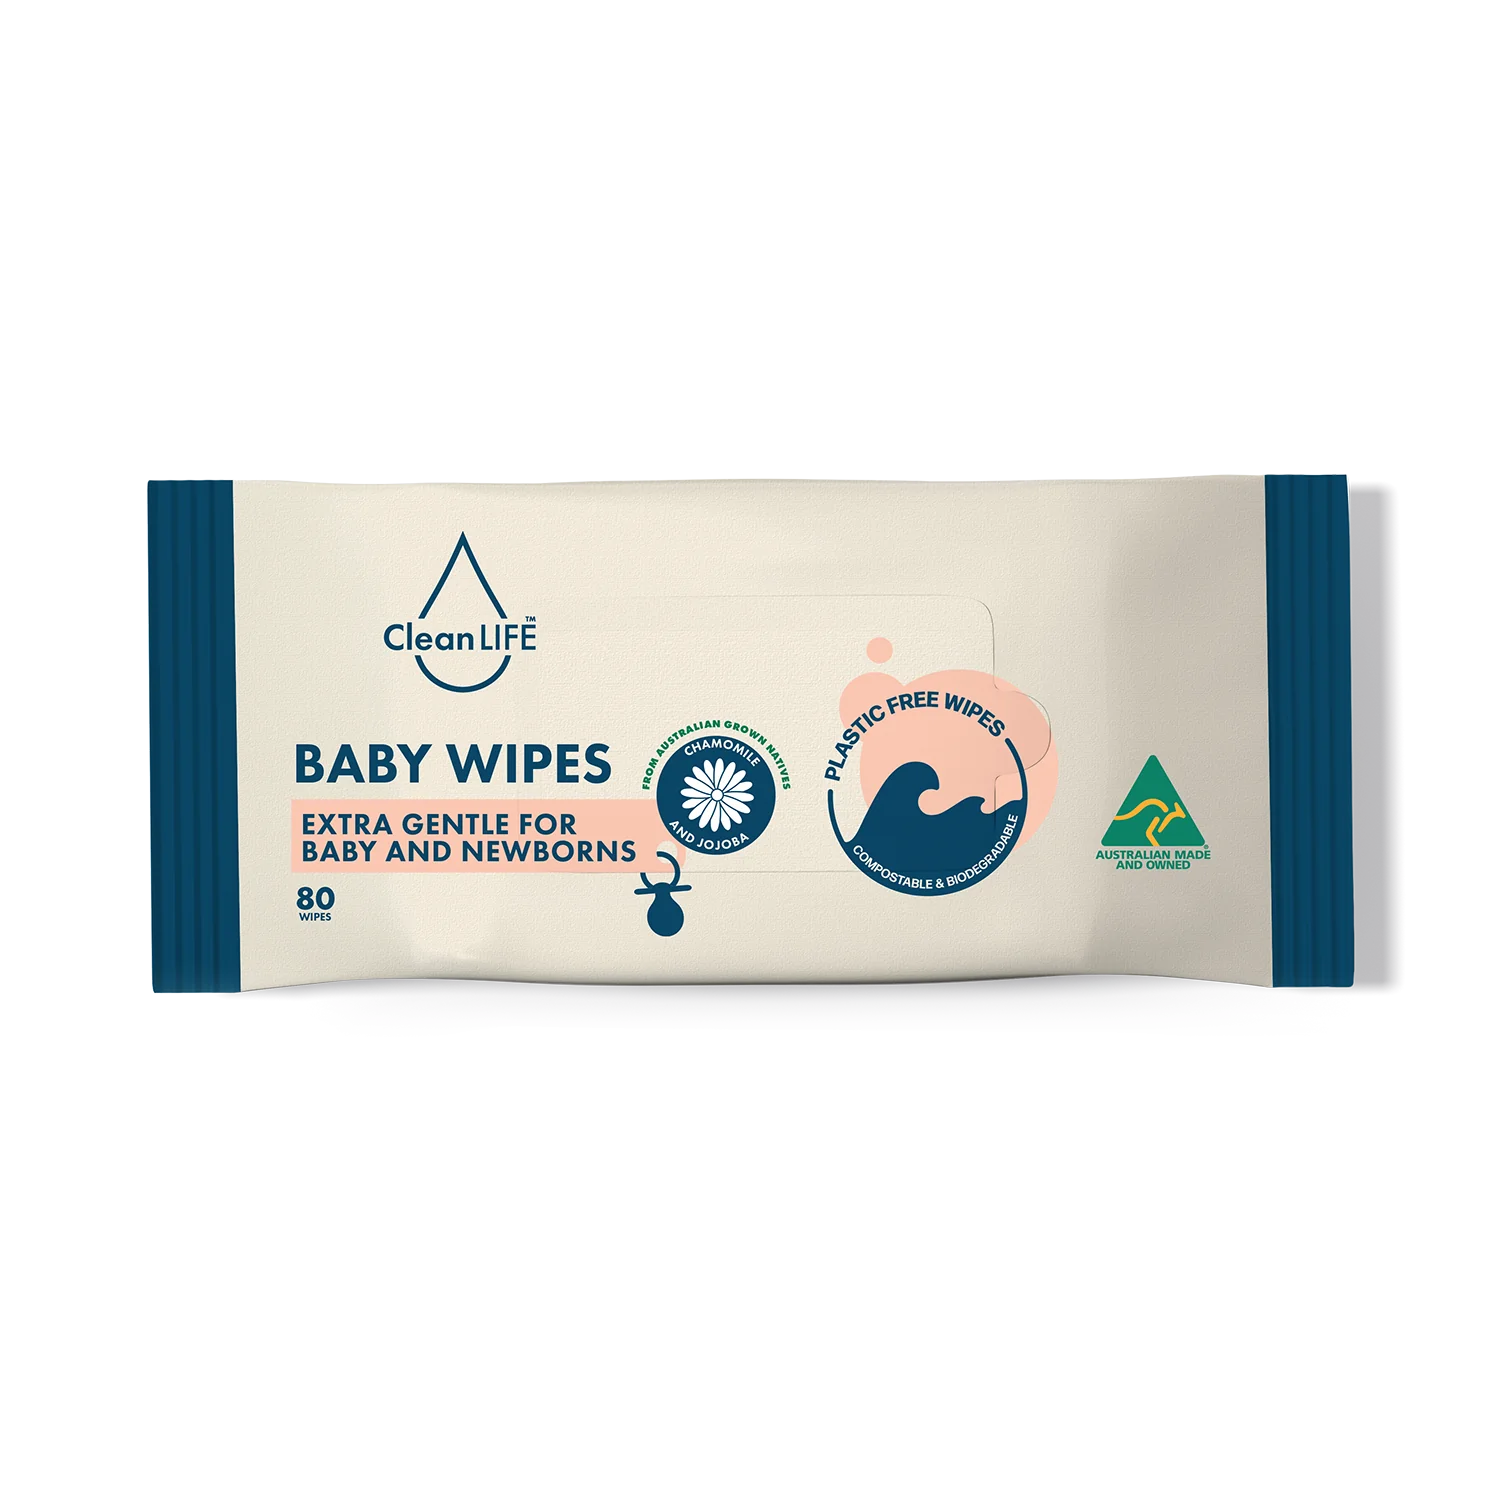 Baby wipes - CleanLIFE